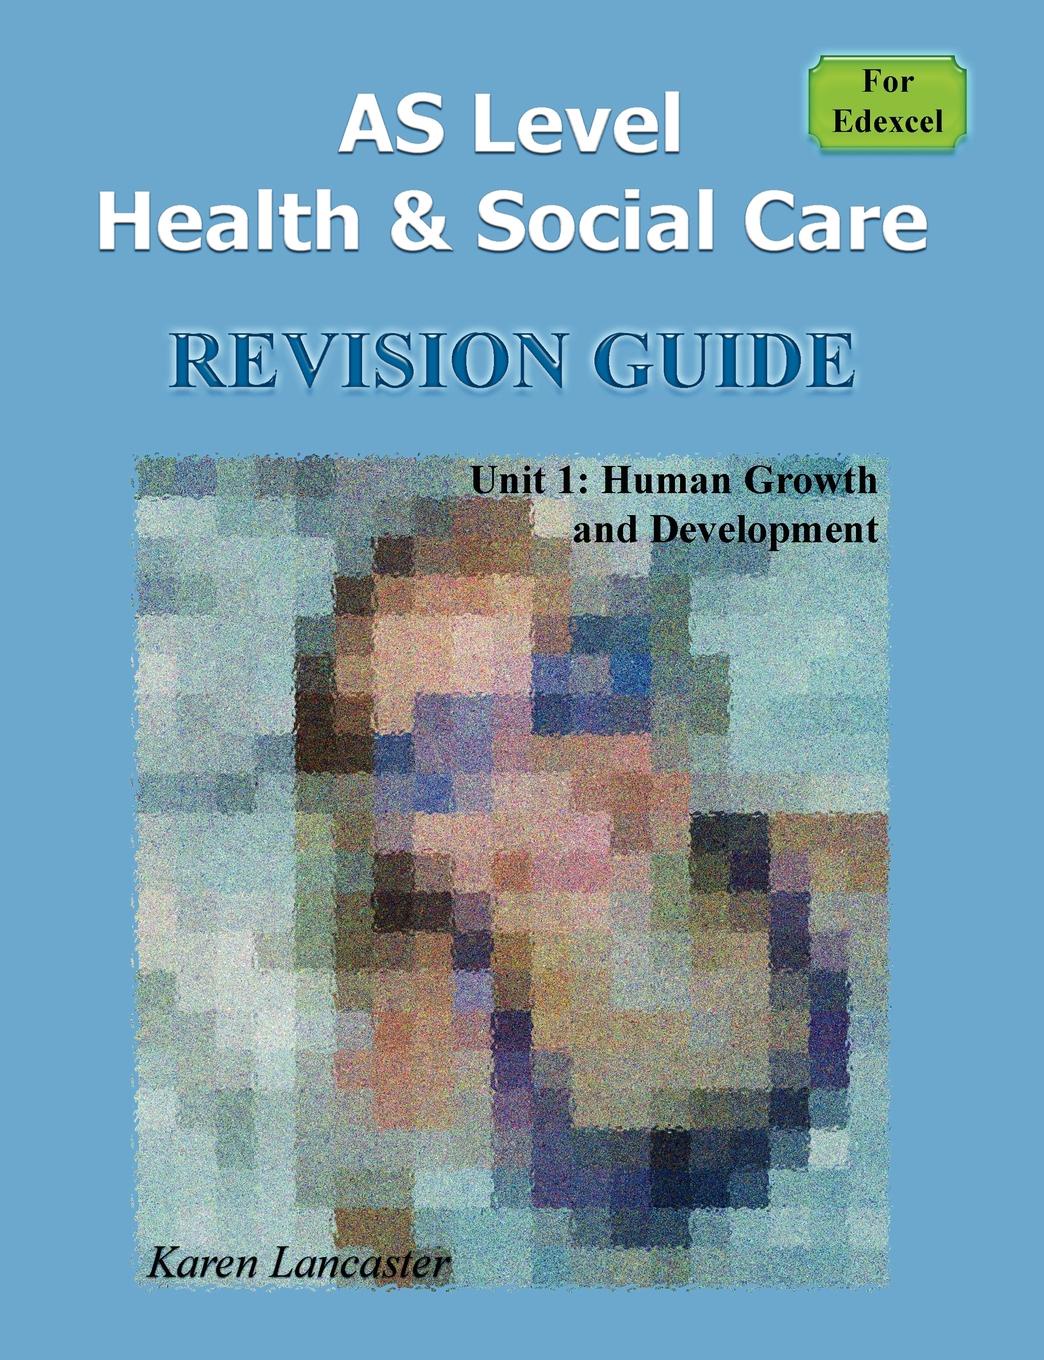 As Level Health . Social Care (for Edexcel) Revision Guide for Unit 1. Human Growth and Development